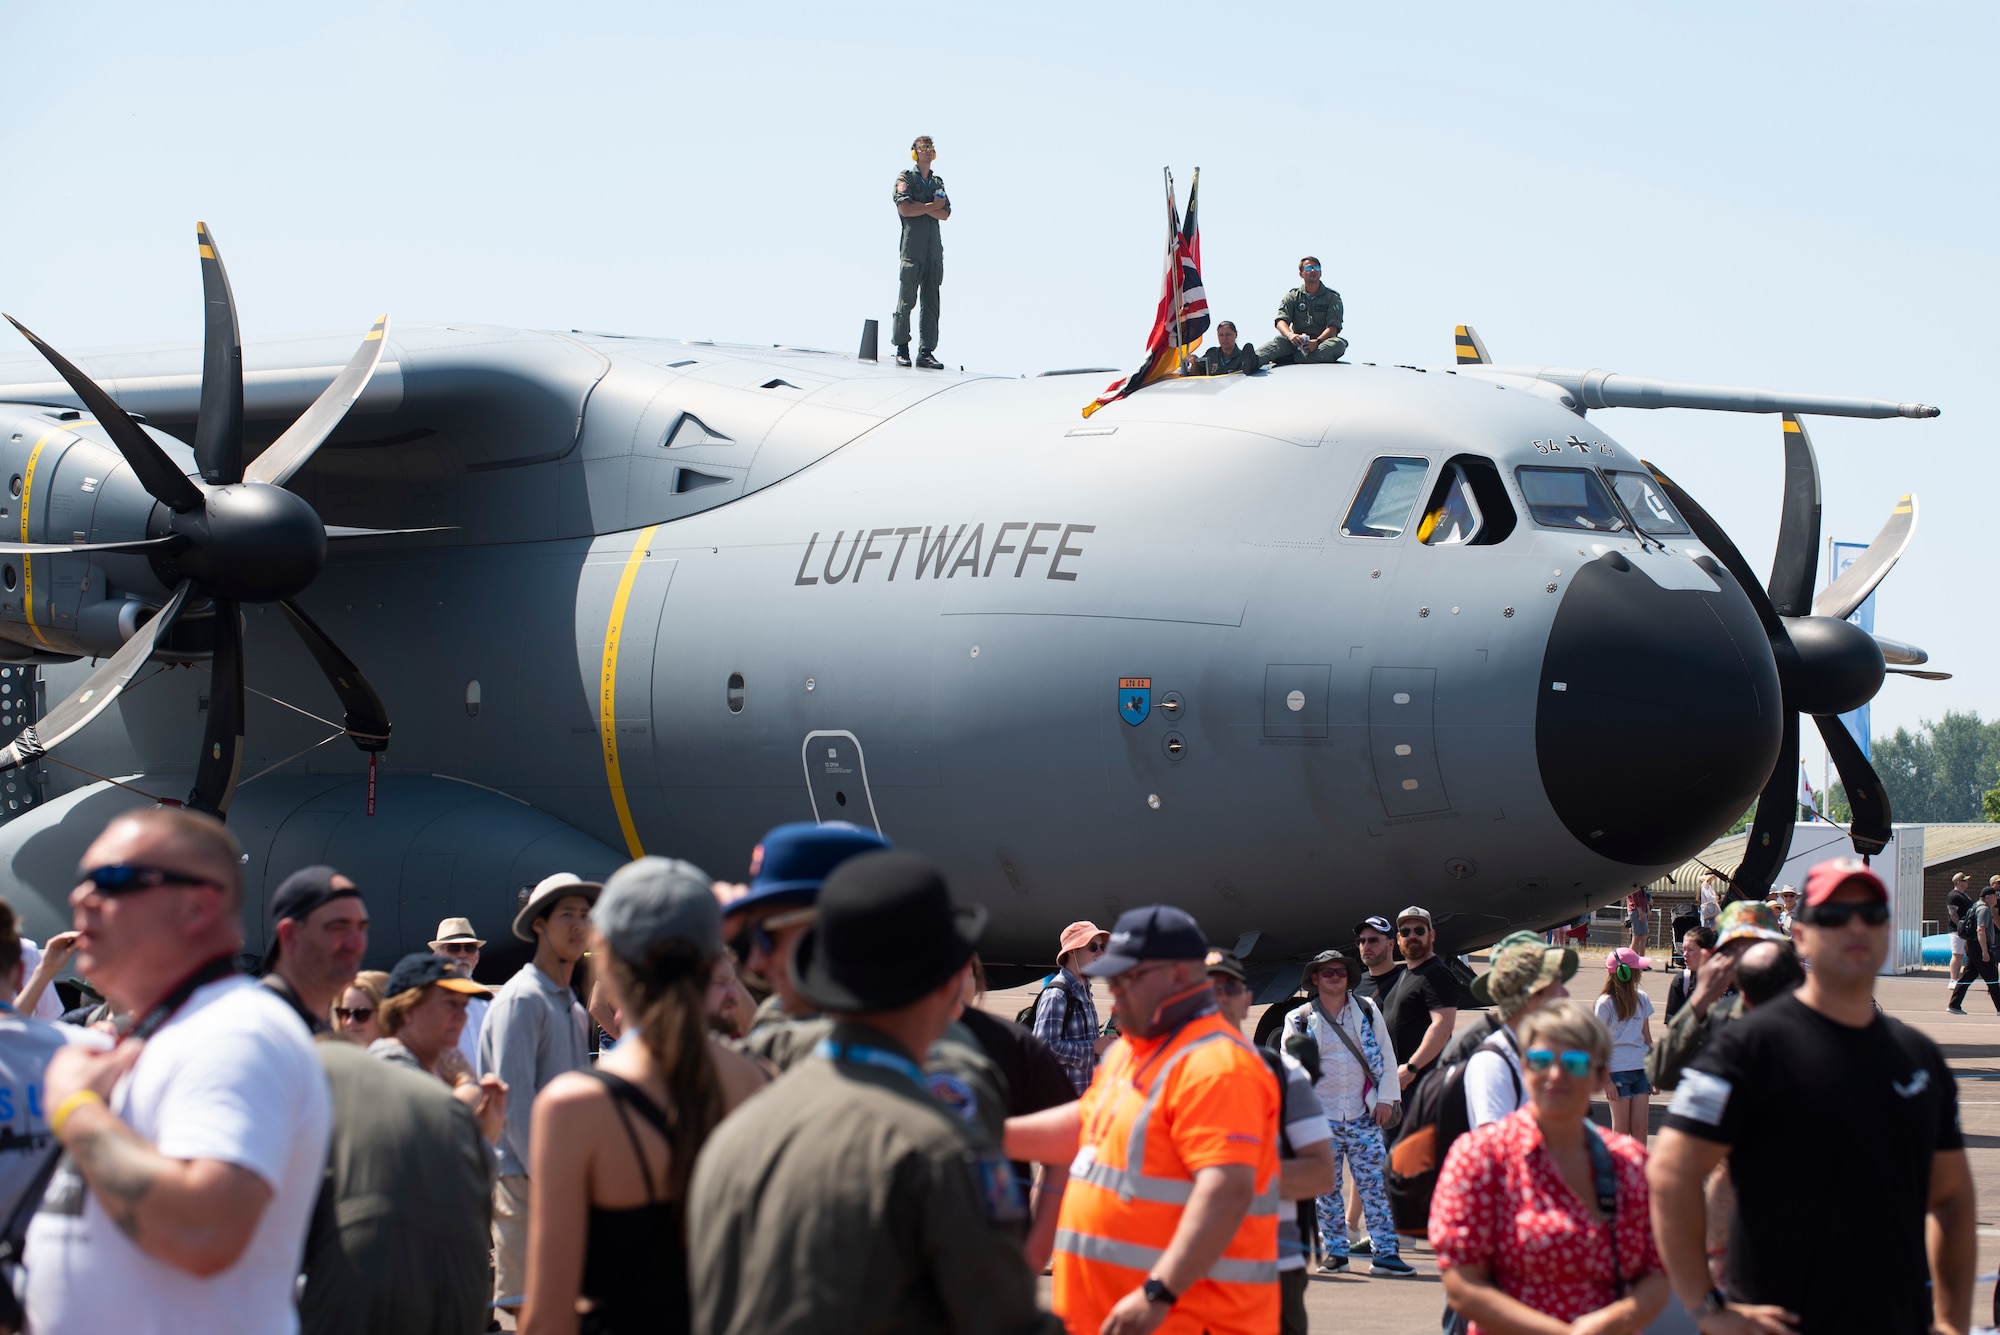 Airshow attendees walk by an aircraft